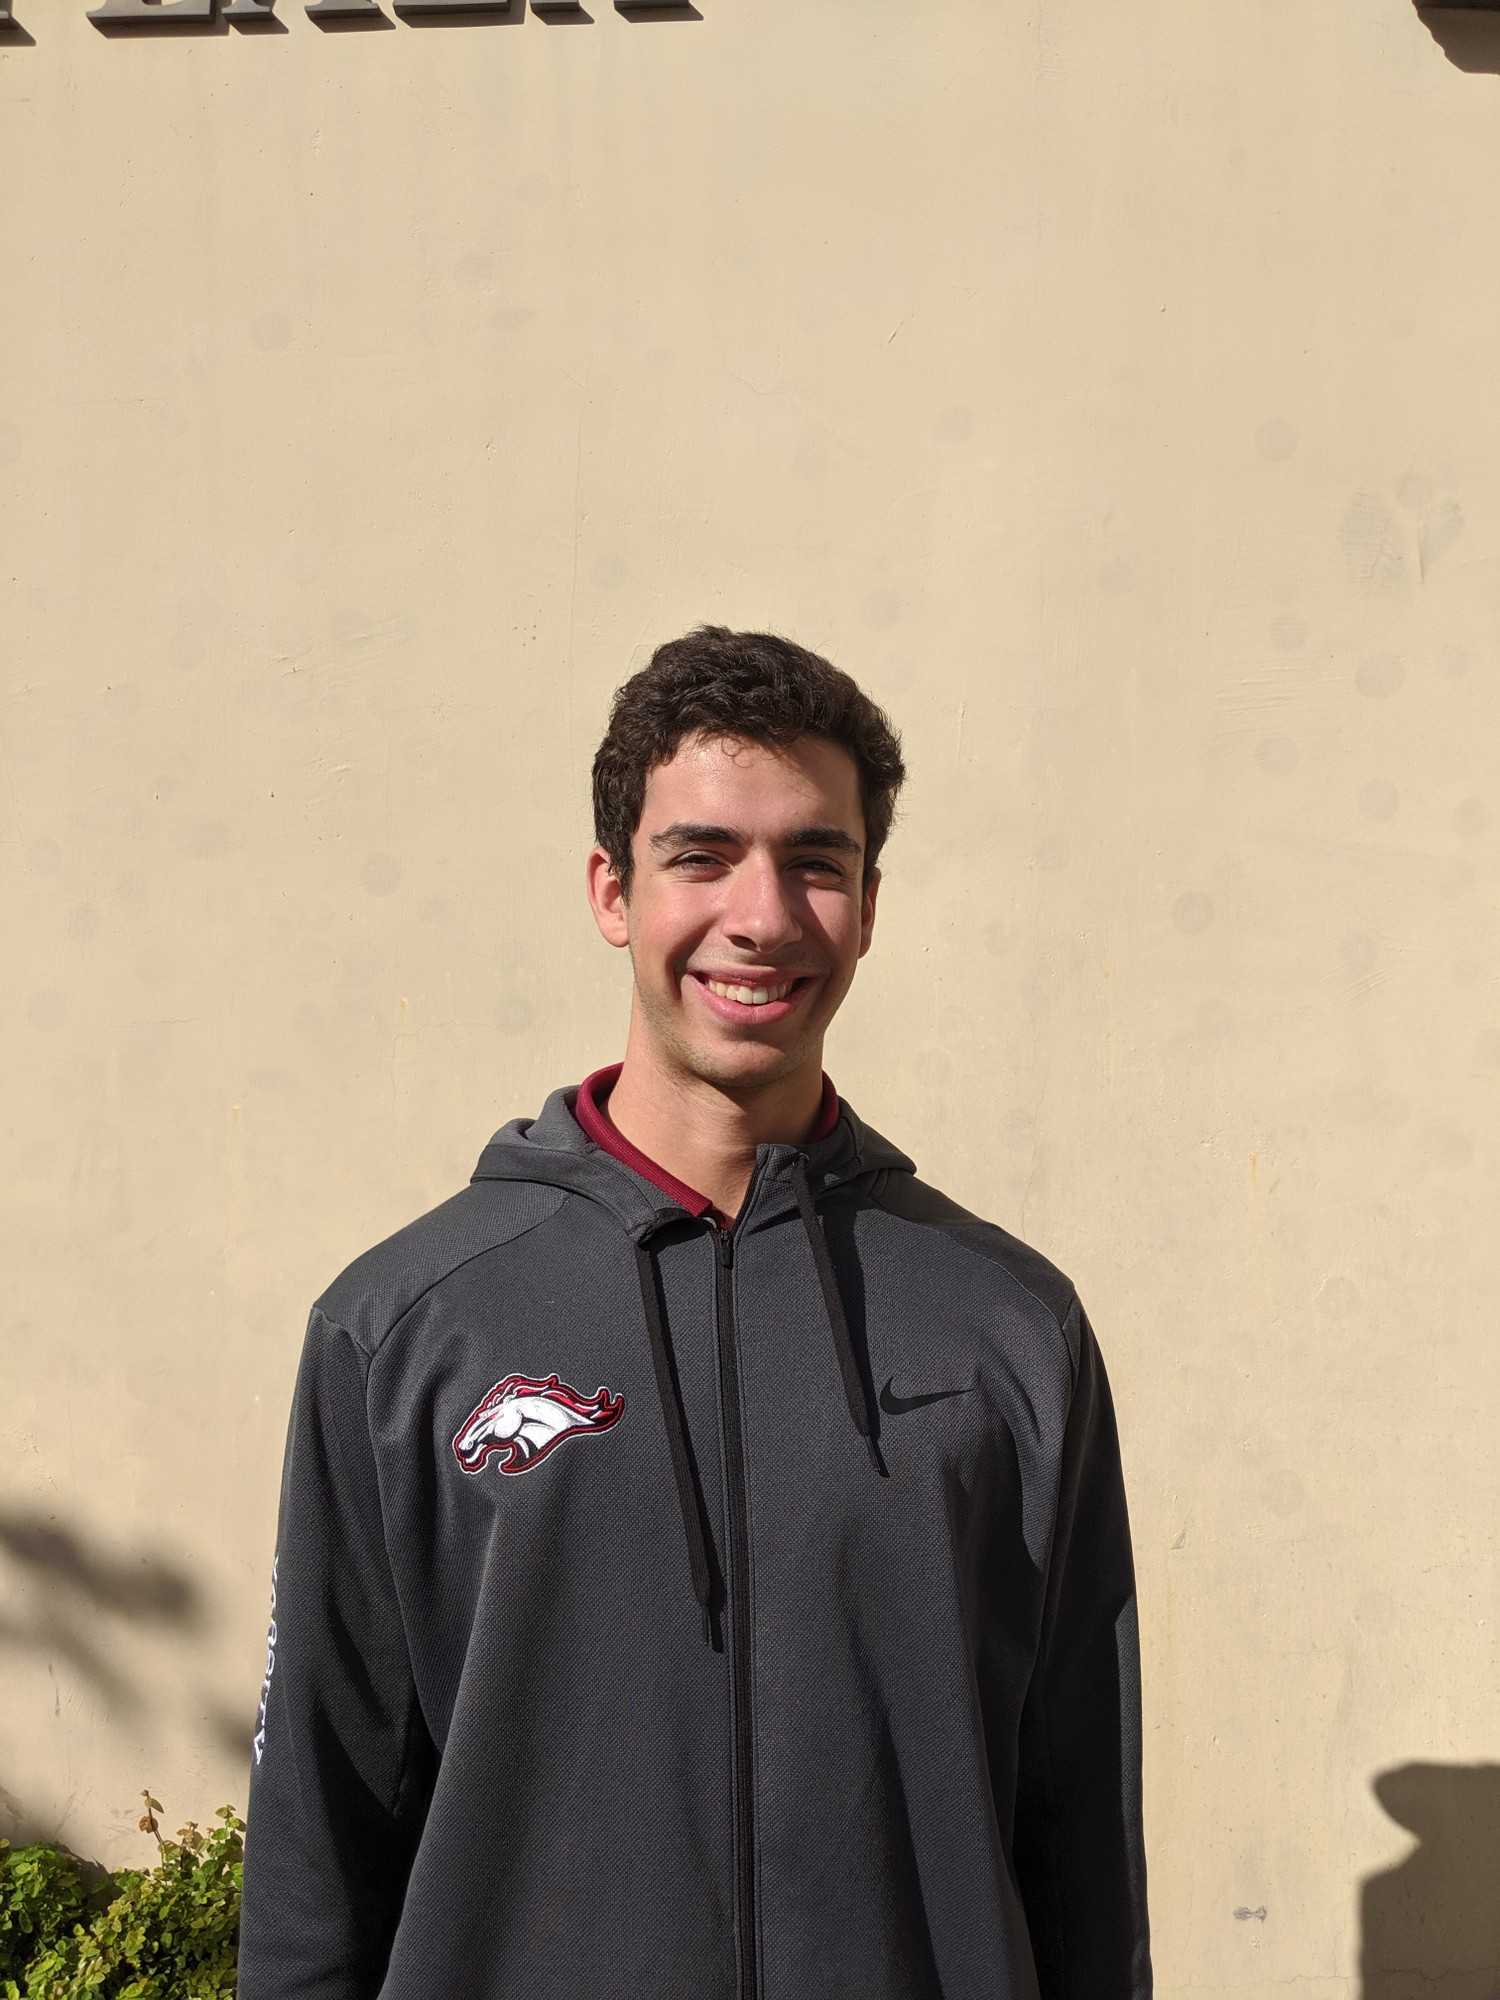 Pitch and Catch: Resley embraces challenges, rigor of rowing – Brophy ...